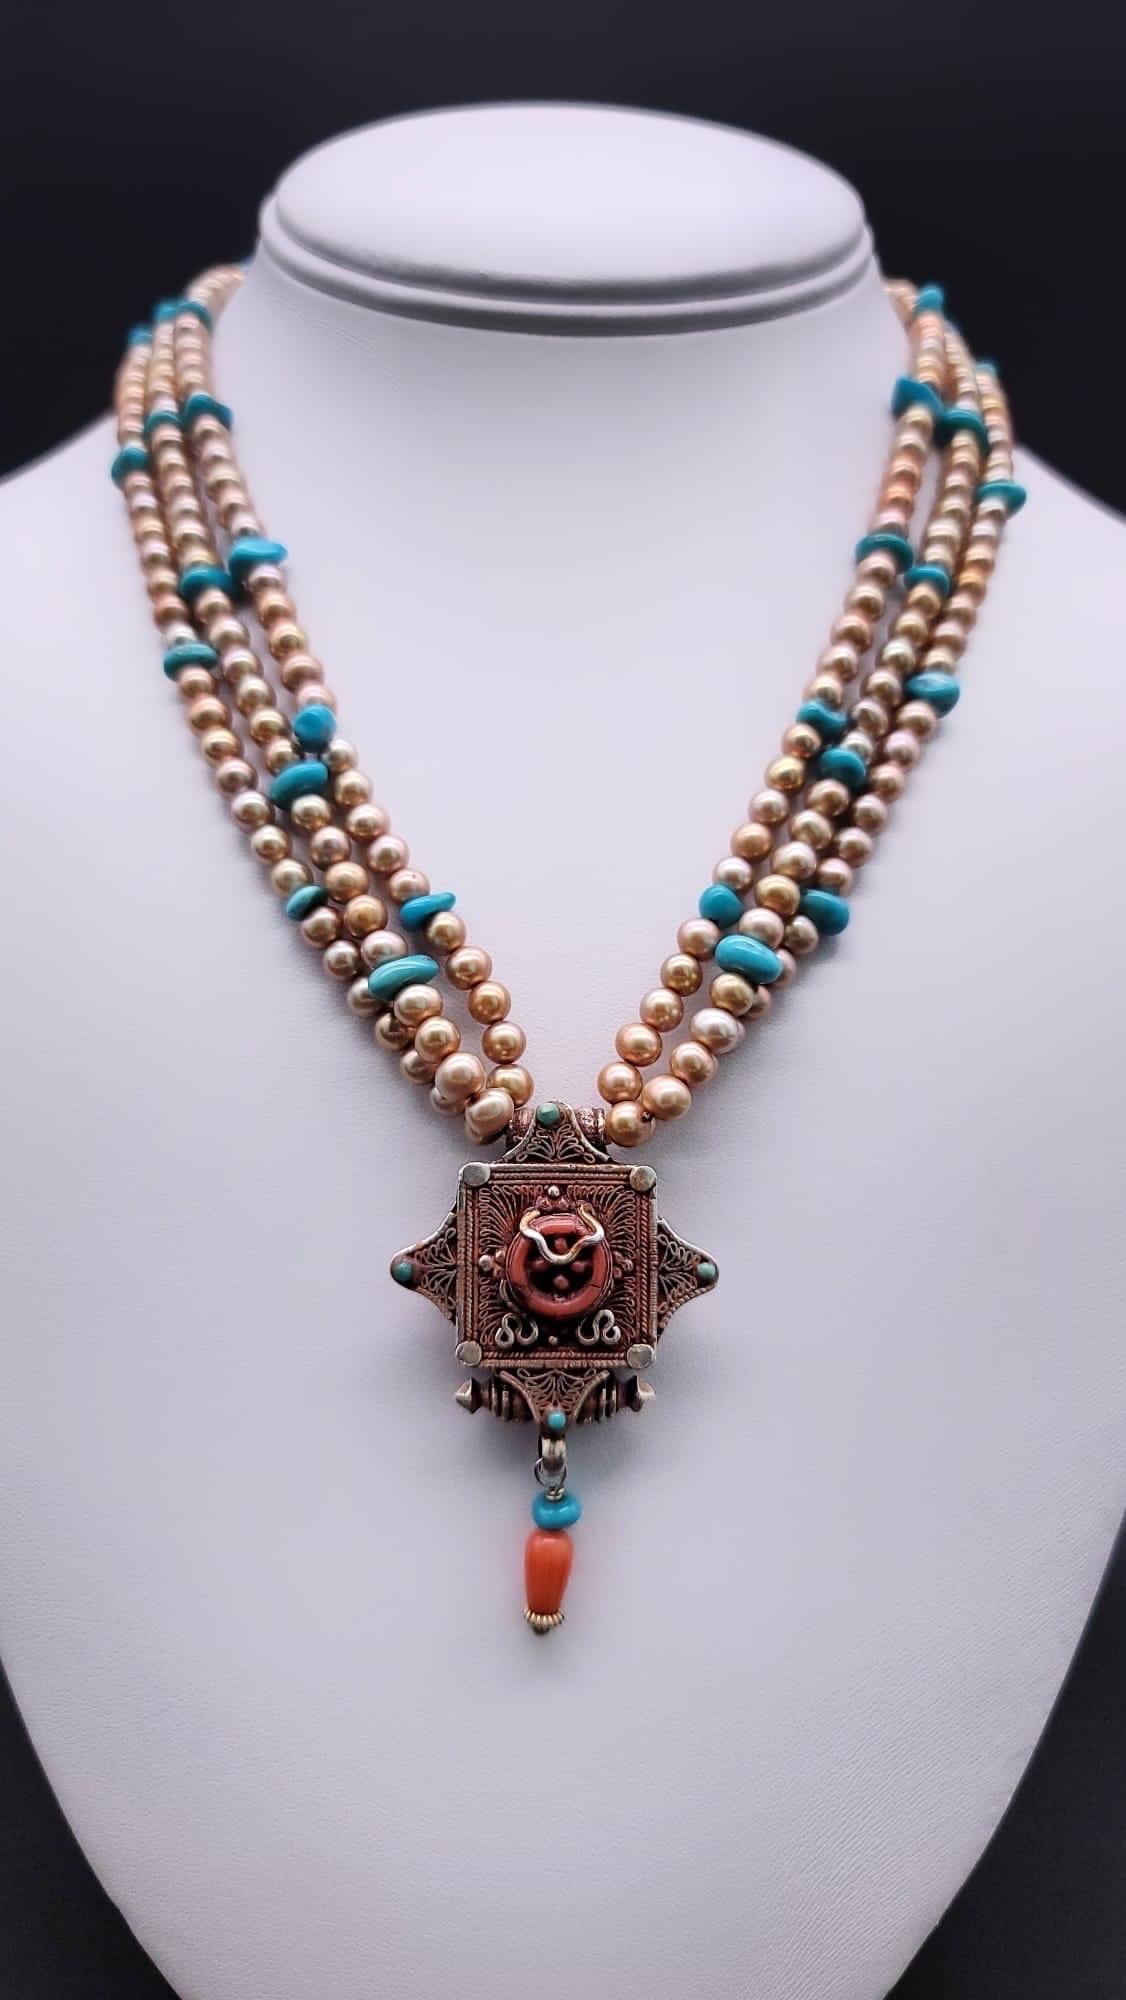 One-of-a-Kind

Introducing our stunning vintage Ghau box pendant hand-crafted in Tibet, a true treasure for any jewelry collection. This intricate piece is a testament to the exceptional filigree work and stone inlays that are typical of Tibetan